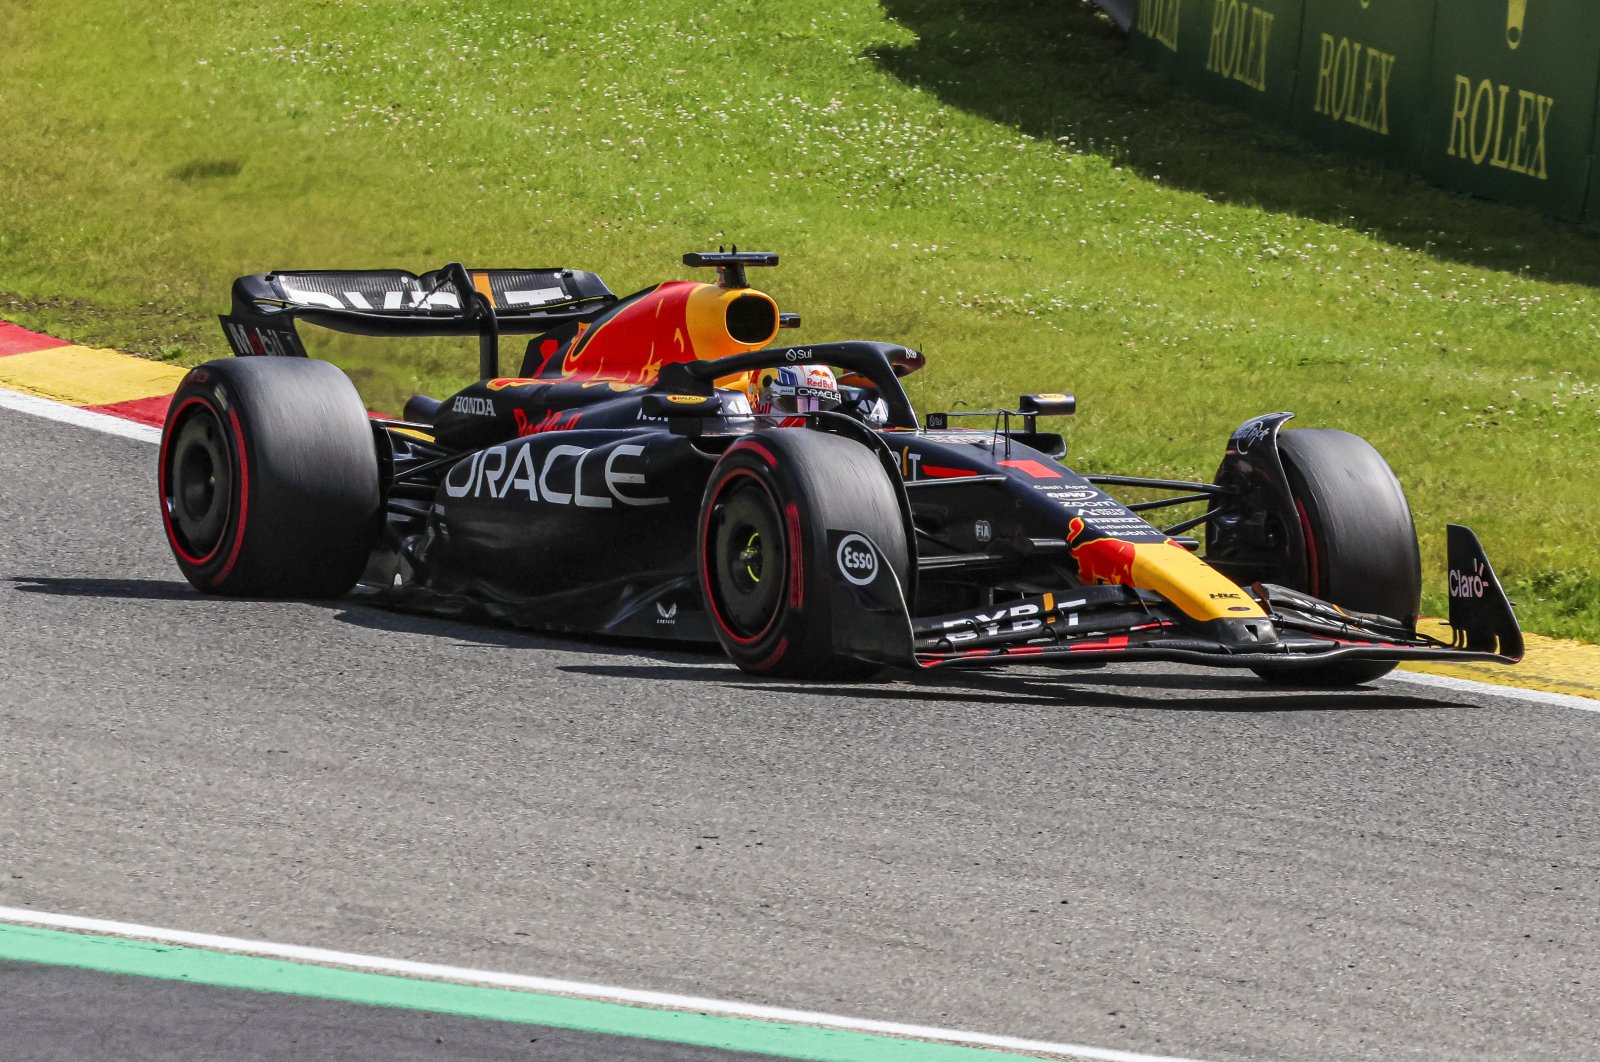 Max Verstappen of the Netherlands winner of the race in action during the F1 Grand Prix of Belgium at Circuit de Spa-Francorchamps, Spa, Belgium, July 30, 2023. (Gettty Images Photo)